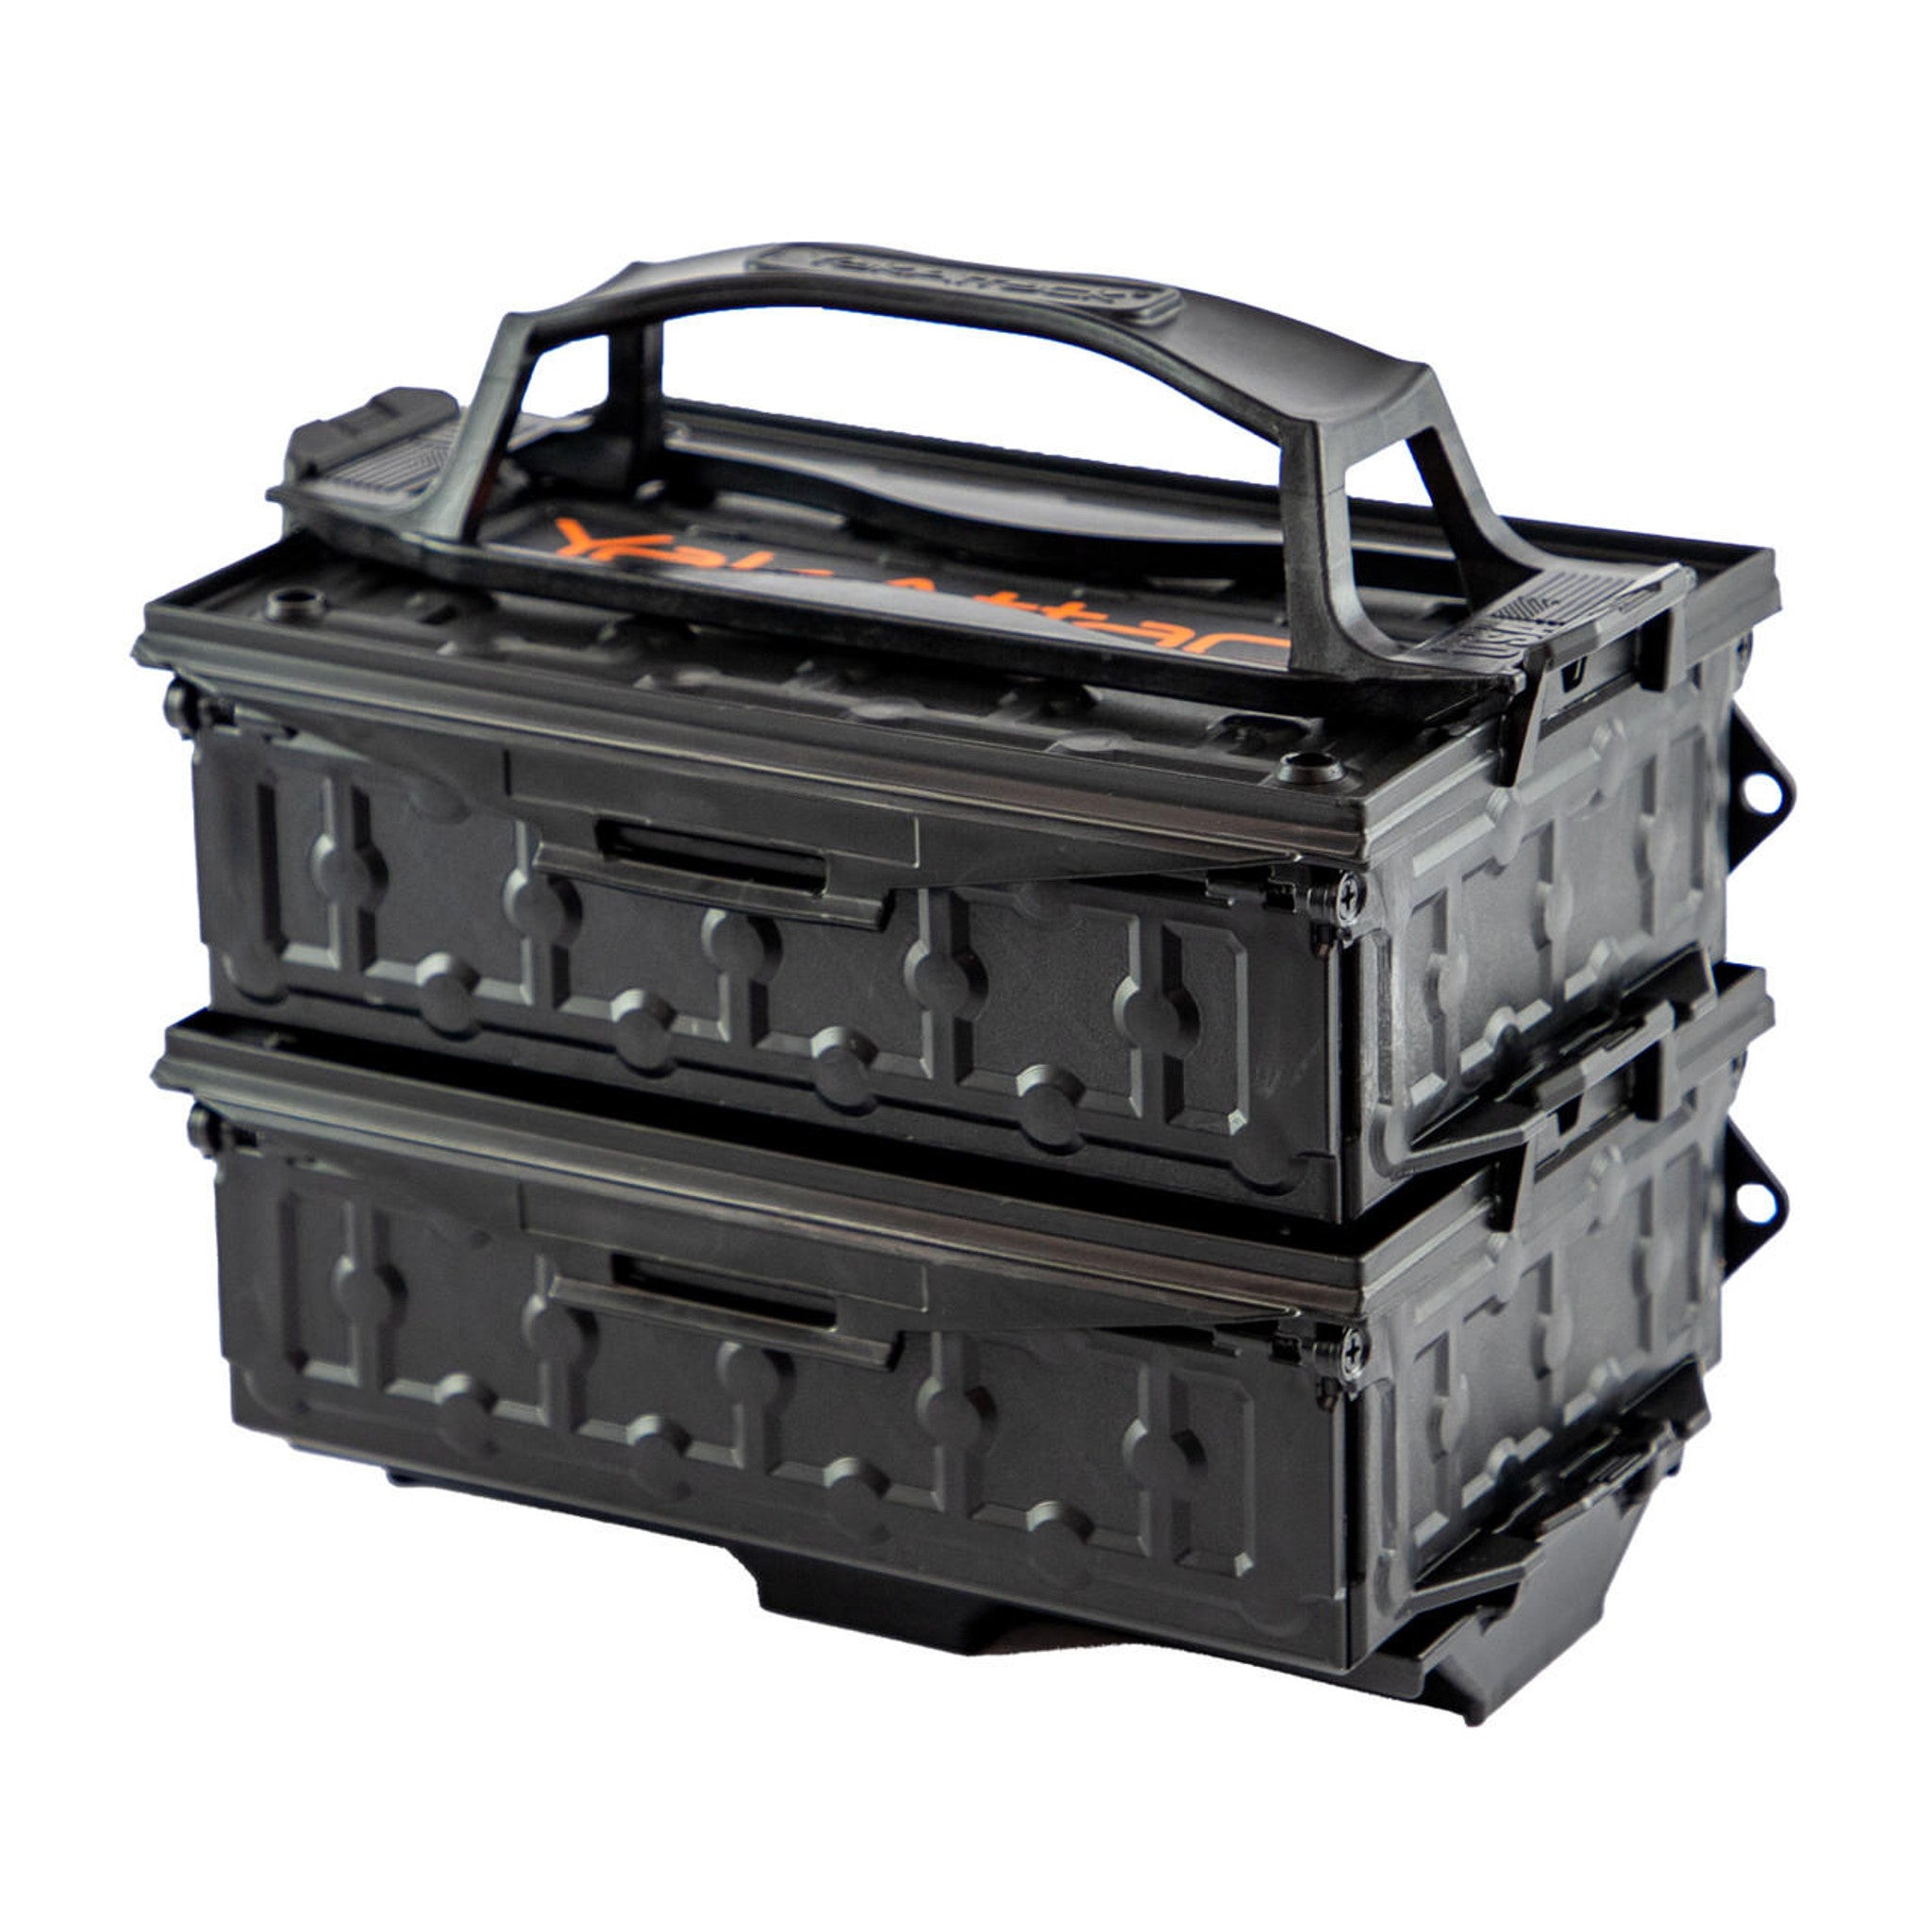 Fully Loaded TracPak Combo Kit, Two Boxes, Track Mount, Handle, and 3 Trays